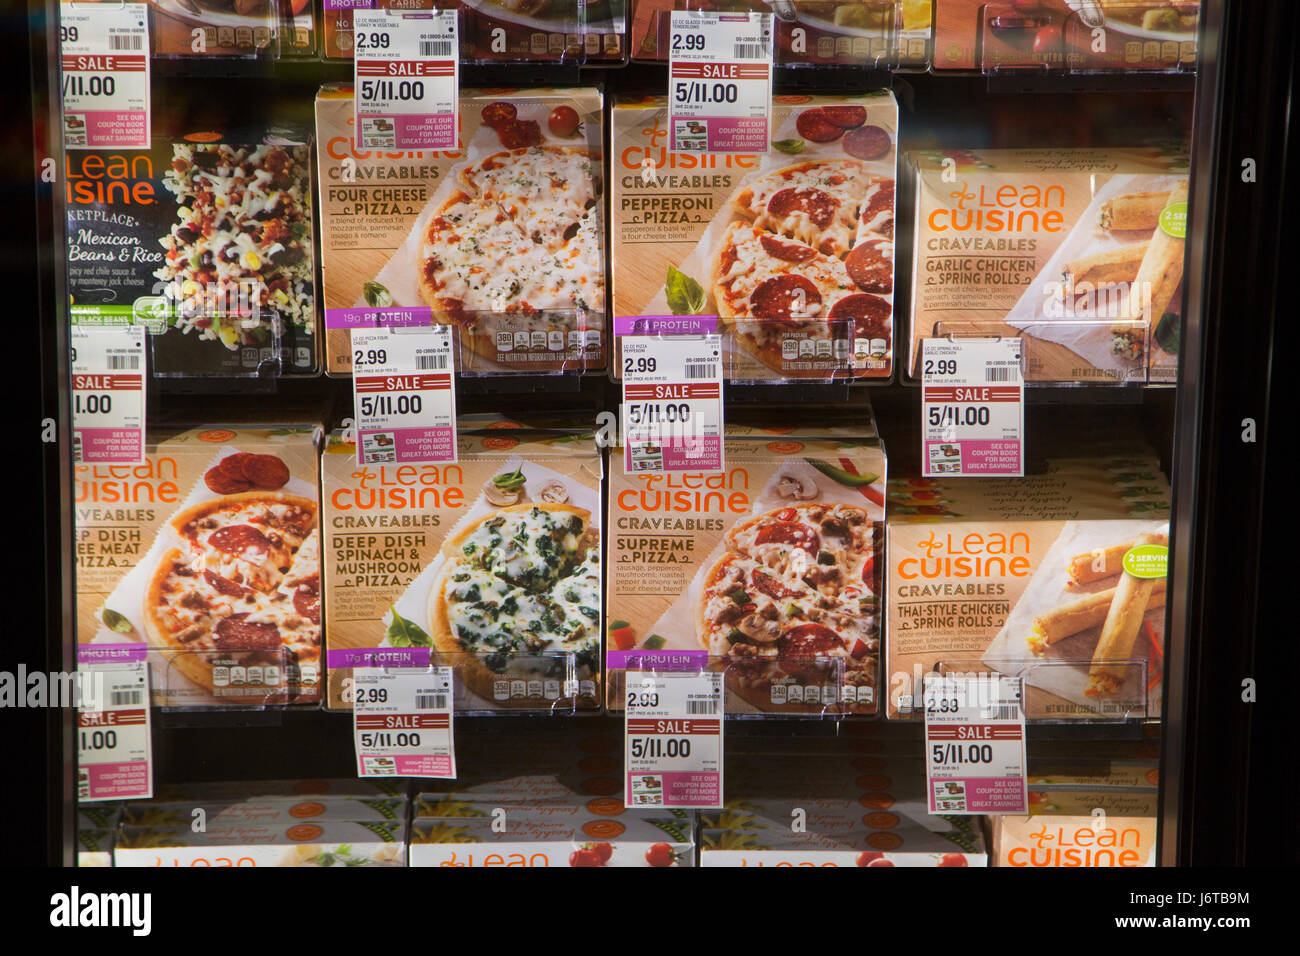 Lean Cuisine frozen meals in the freezer case of a grocery store Stock Photo